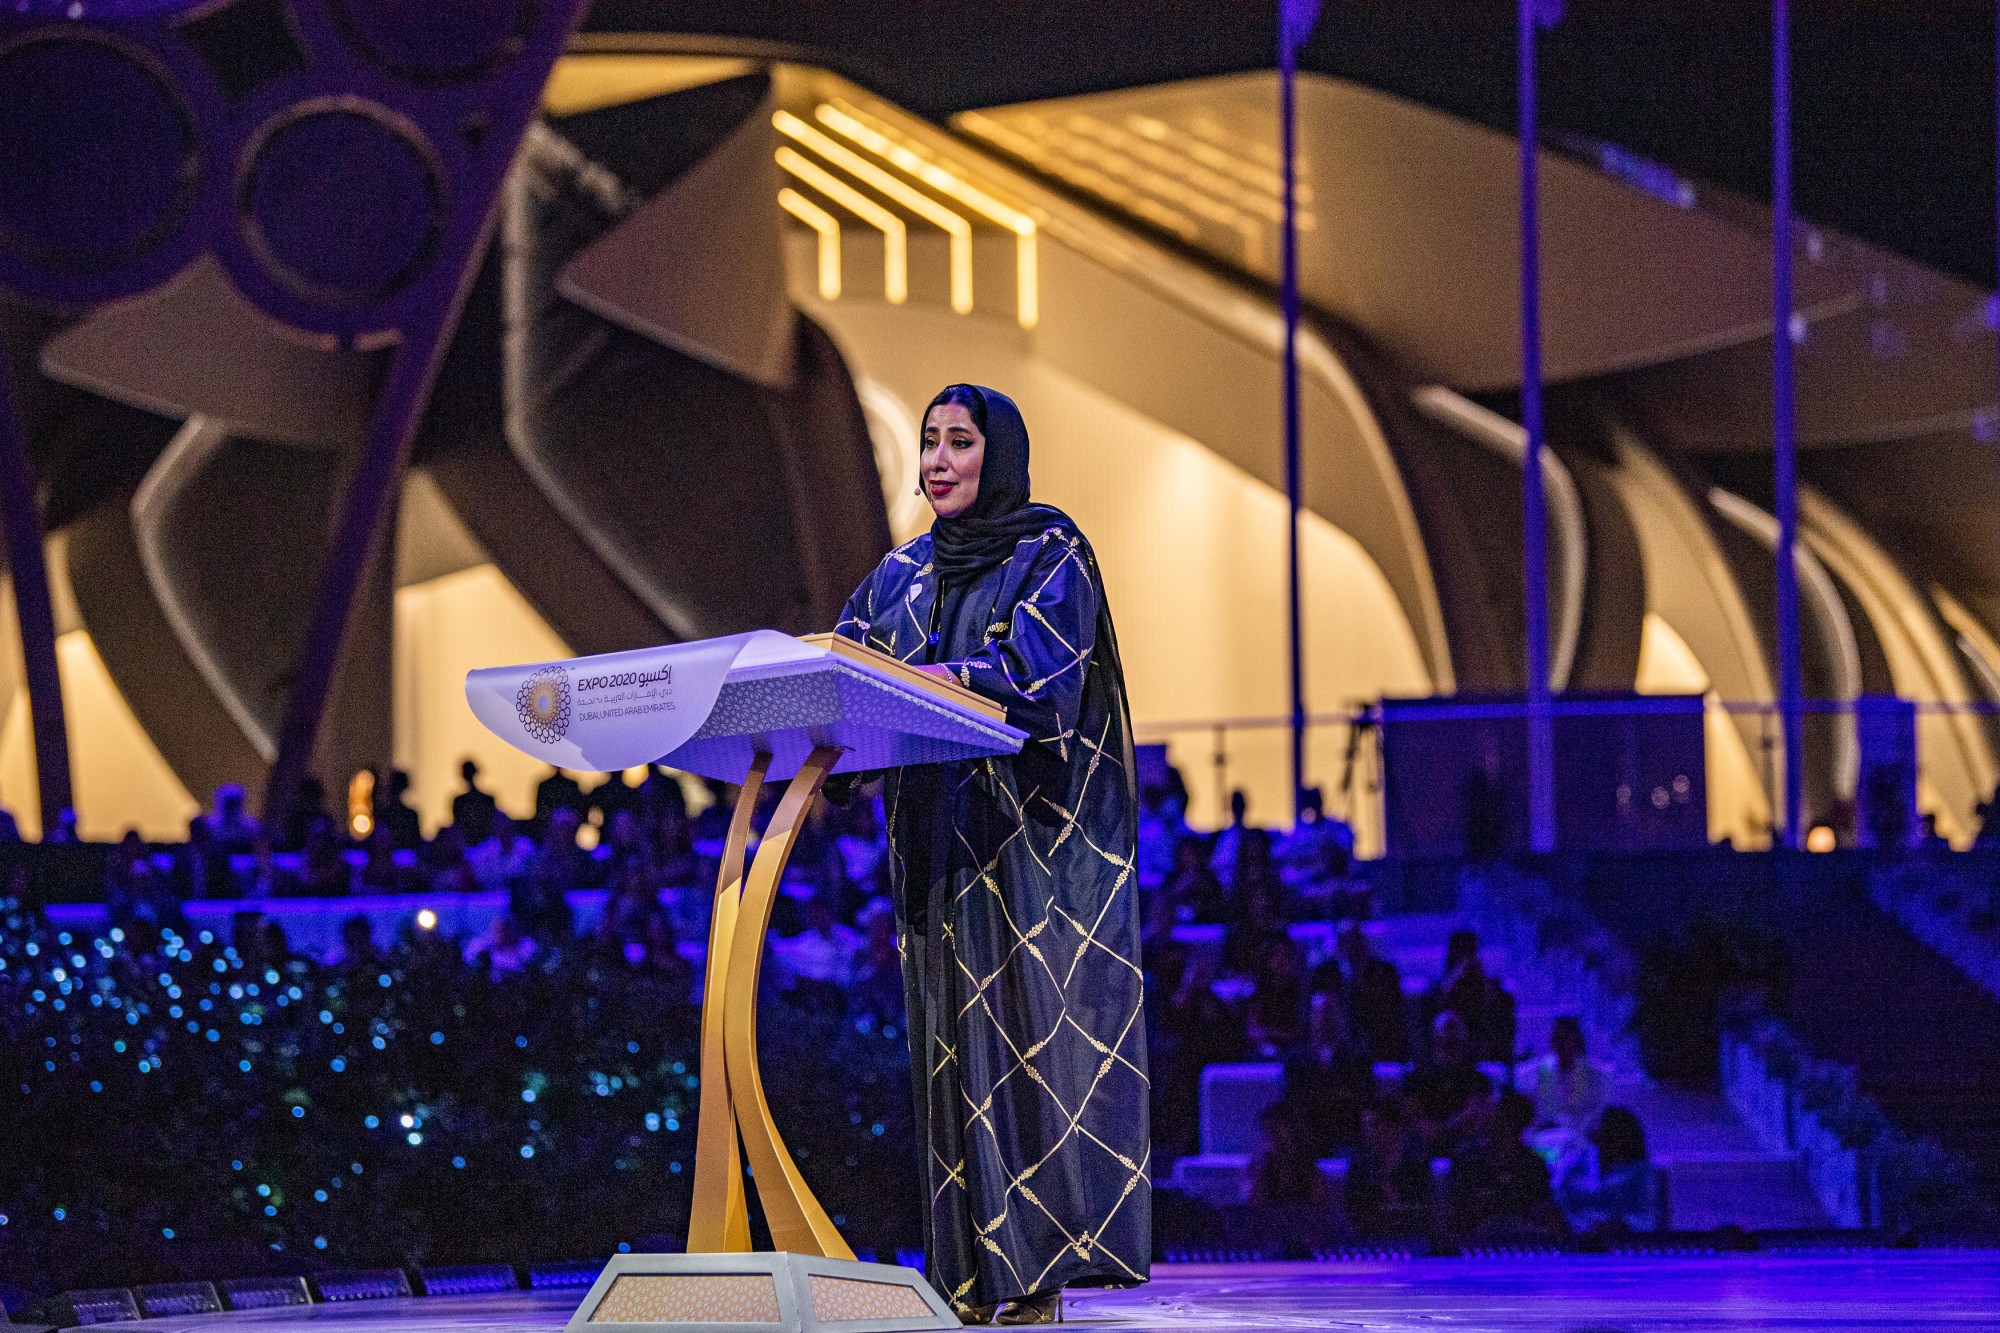 Her Excellency Mona Al Marri, Director General of the Government of Dubai Media Office speaks during the Women-s Pavilion Inauguration at Al Wasl m6793